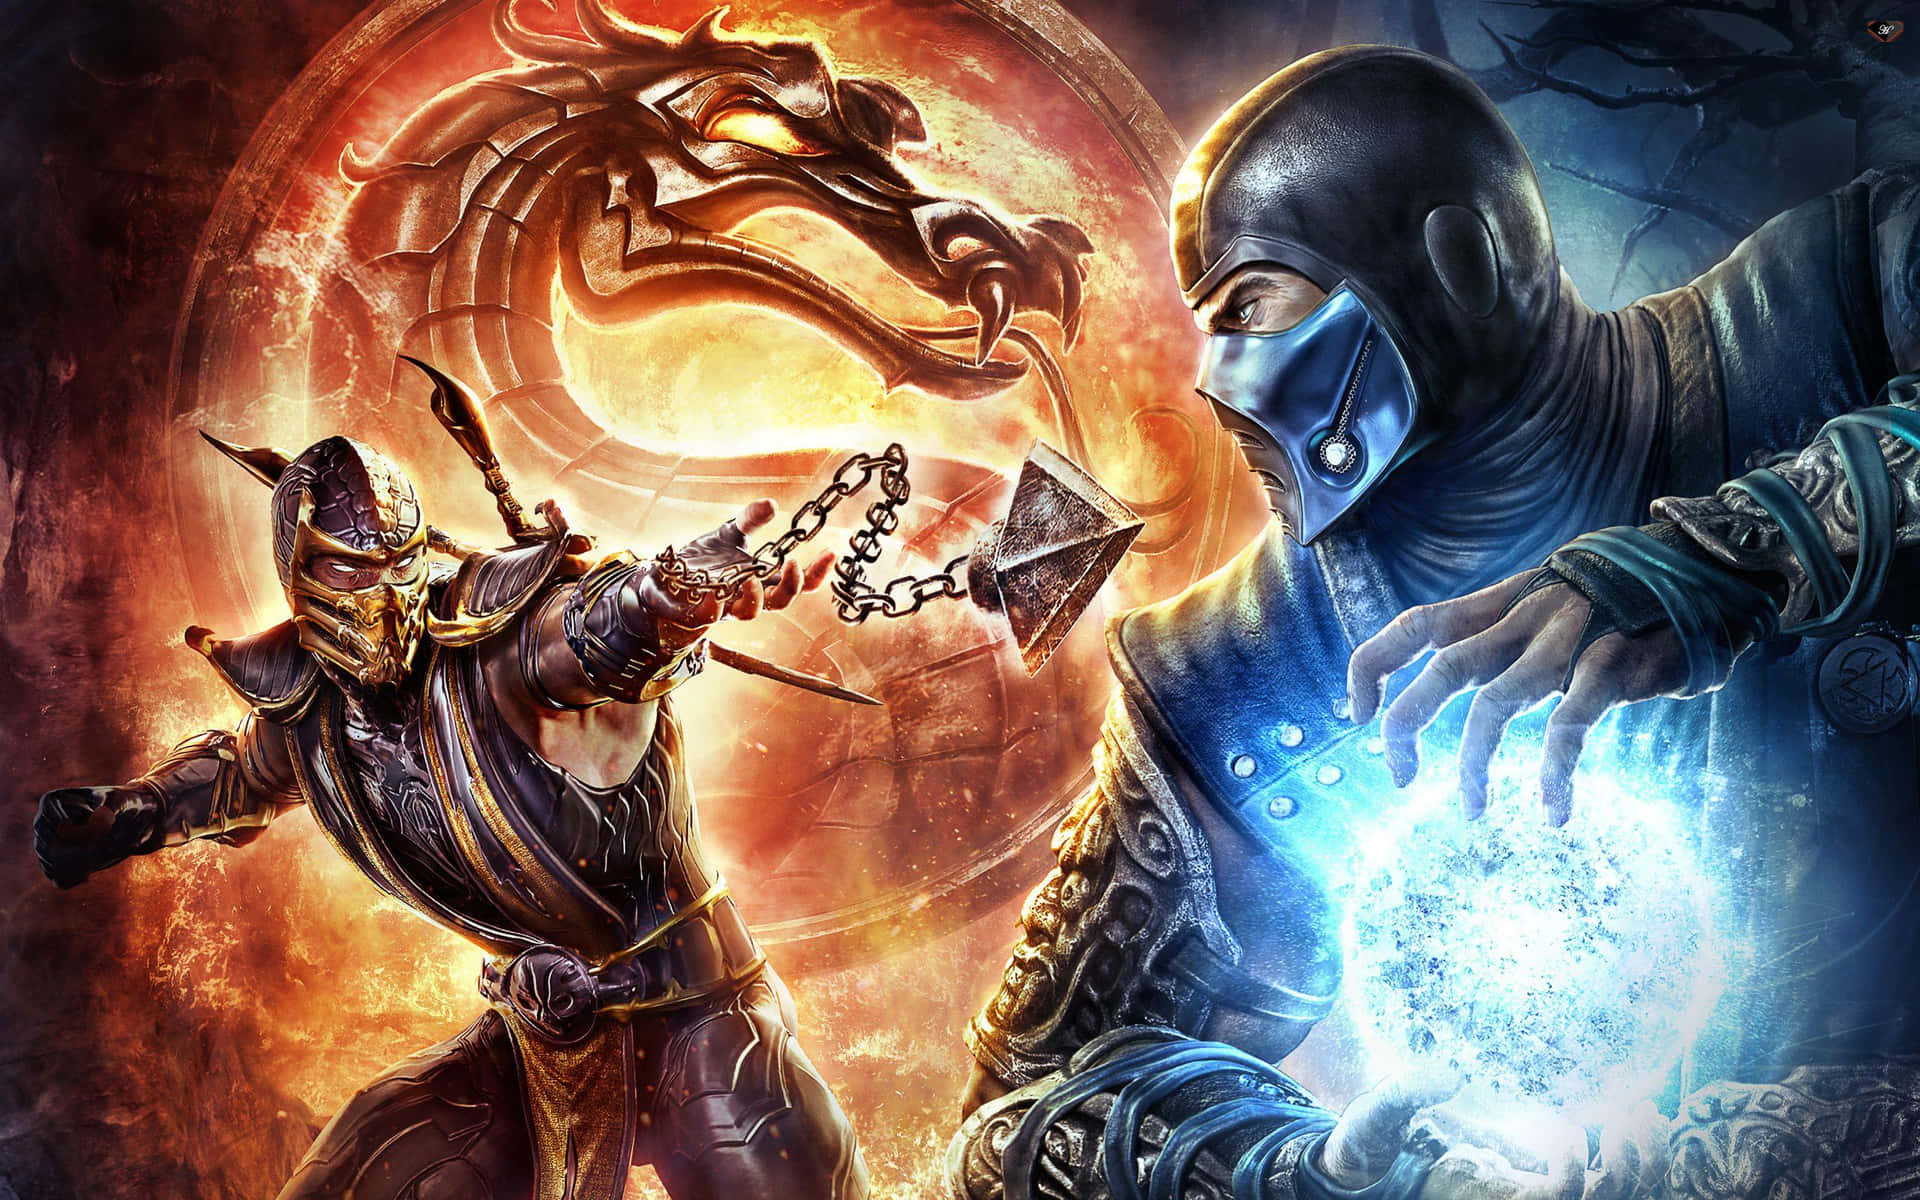 Experience the legendary brutality of Mortal Kombat!